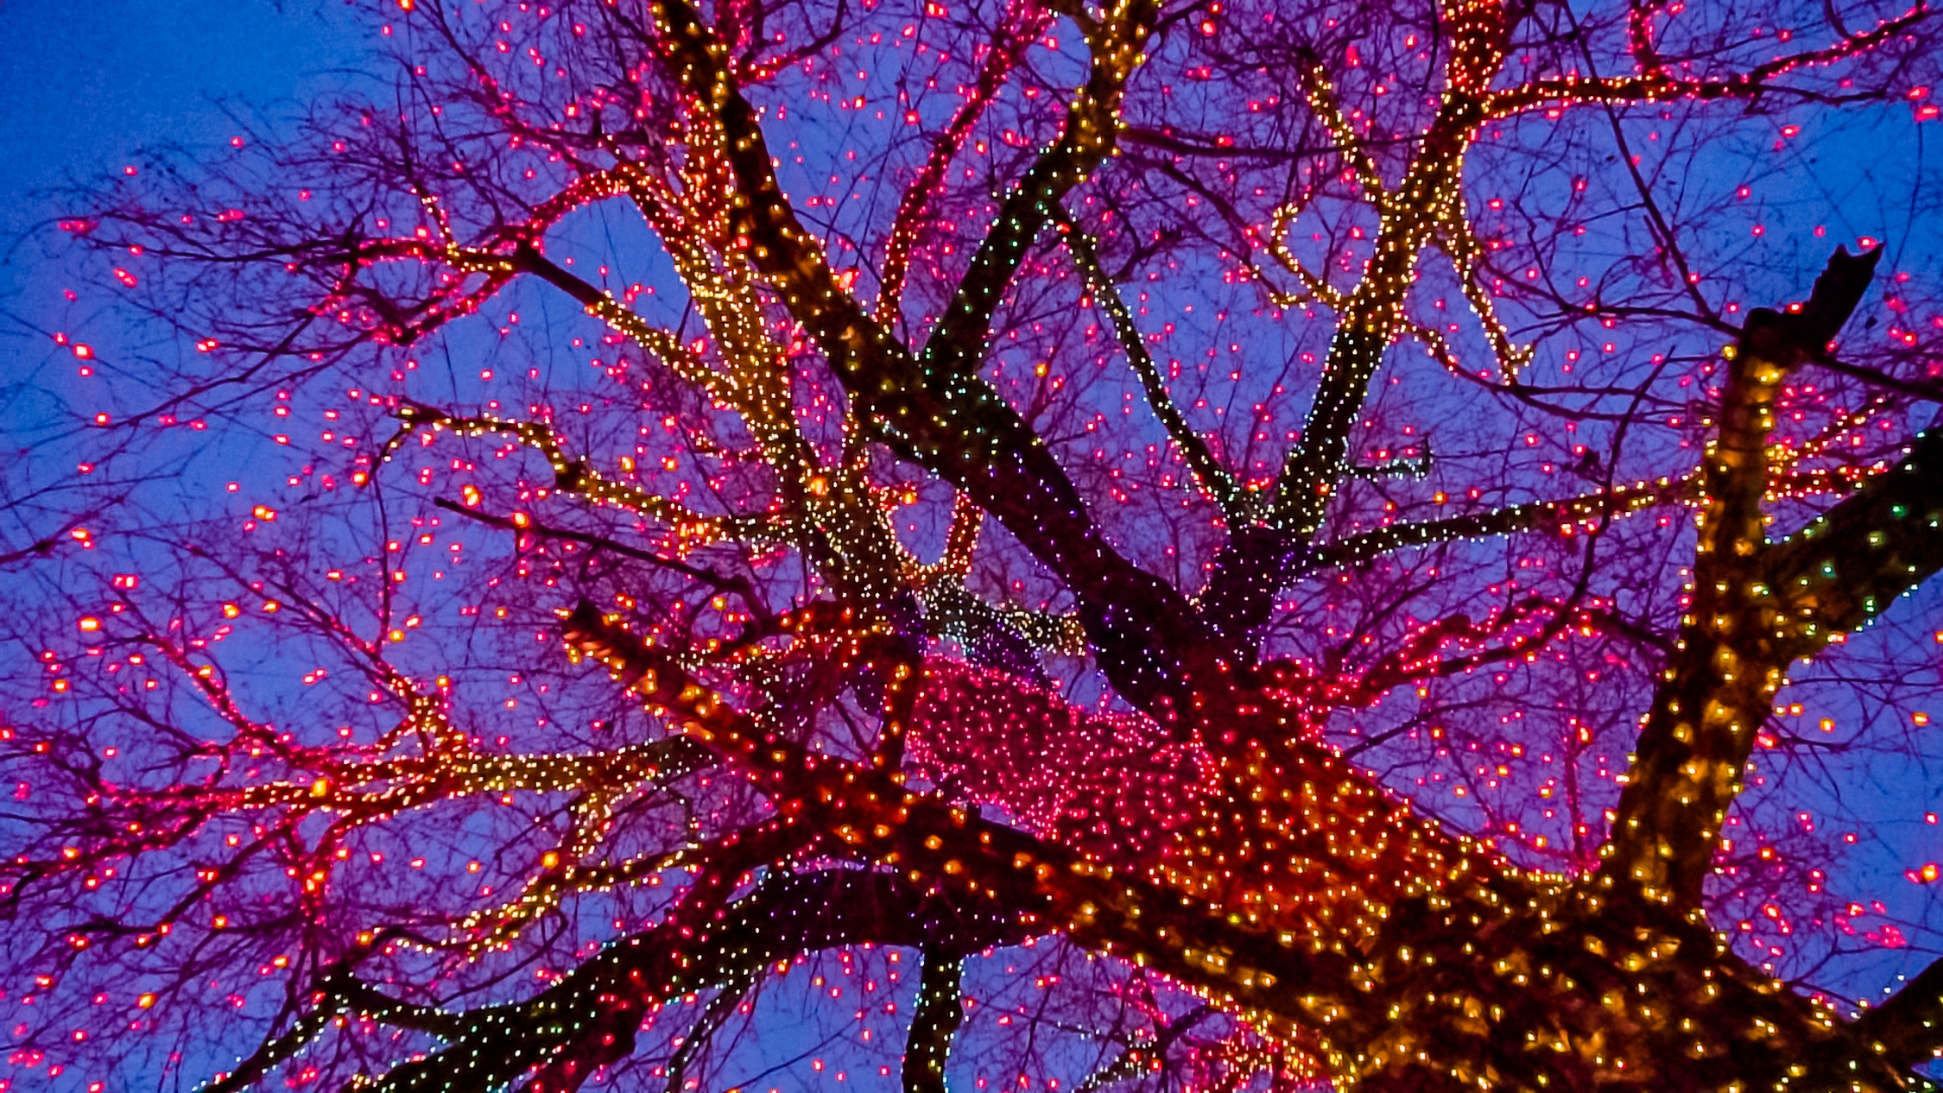 Glowing Christmas Lights And Trees Contact